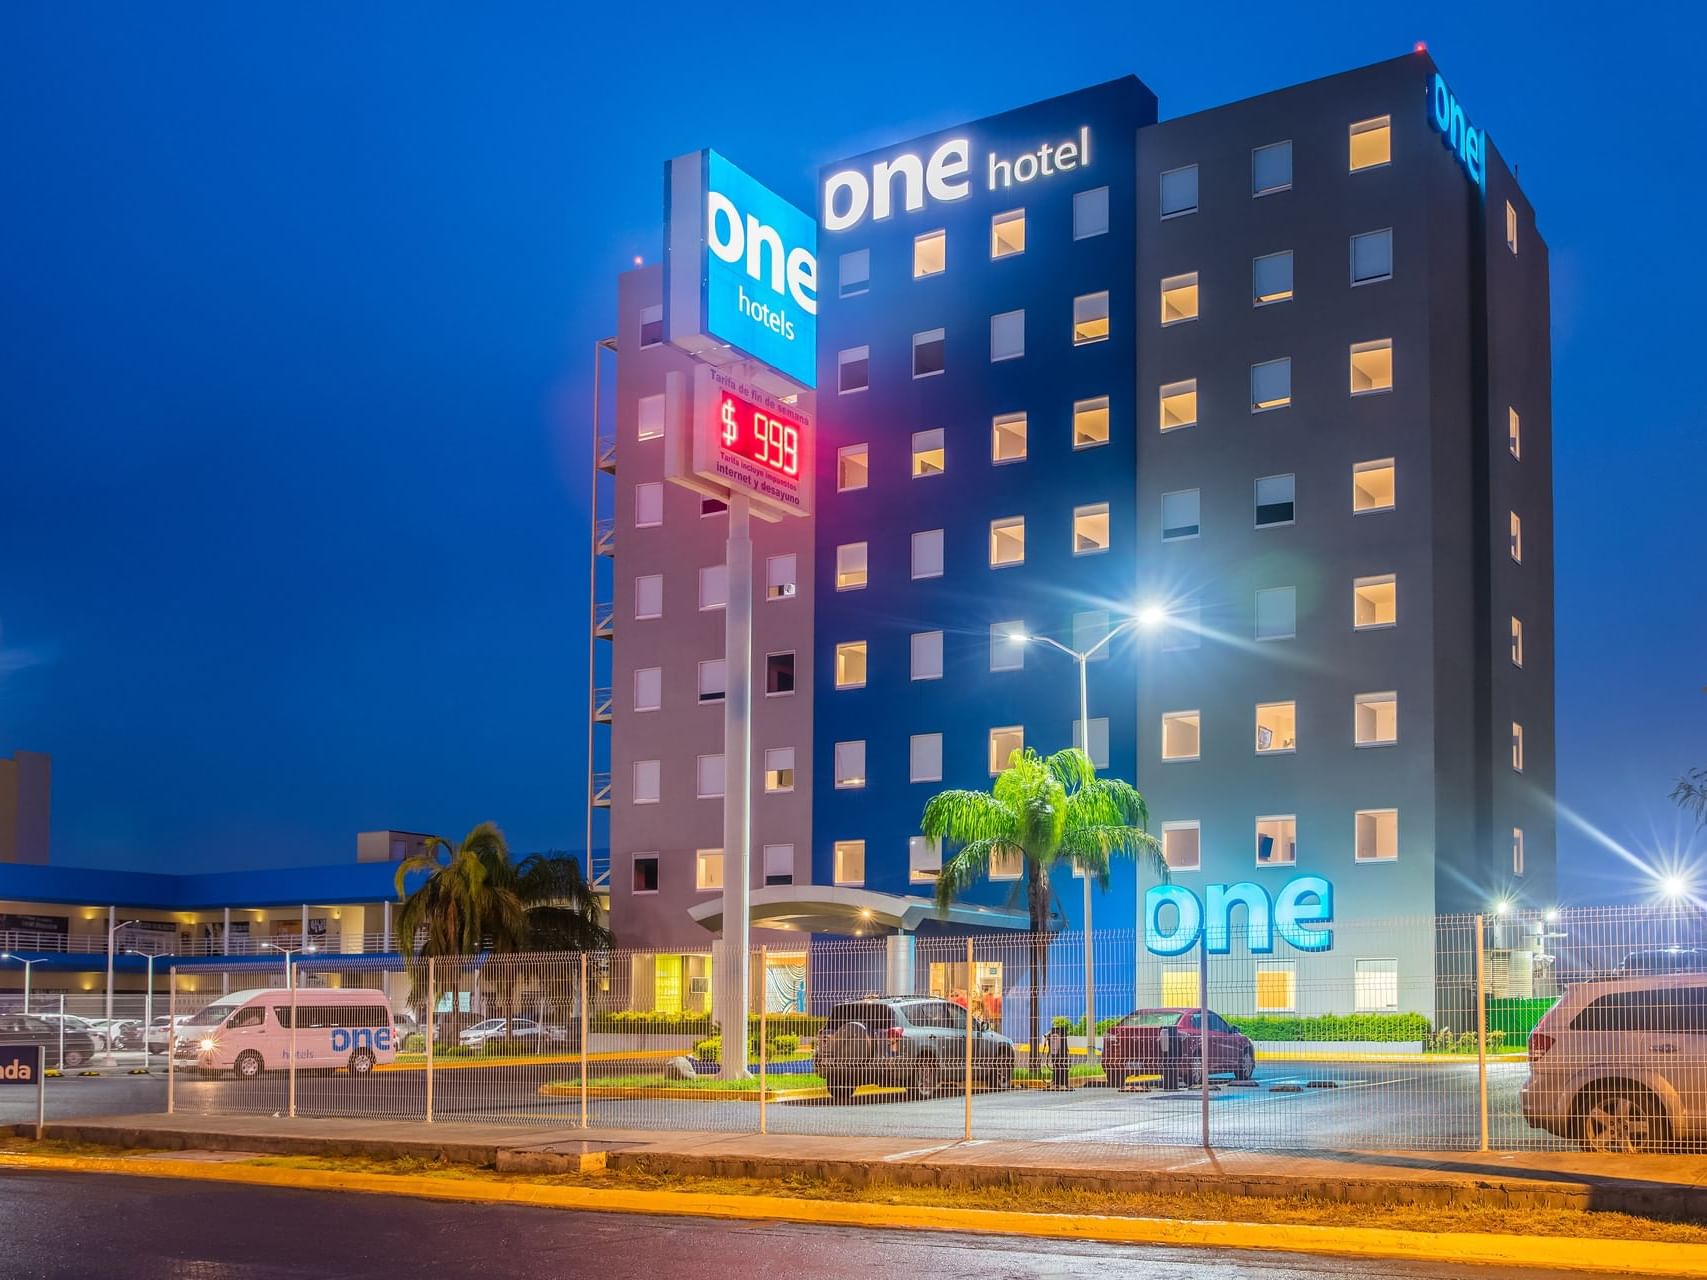 Exterior view of One Hotels at night